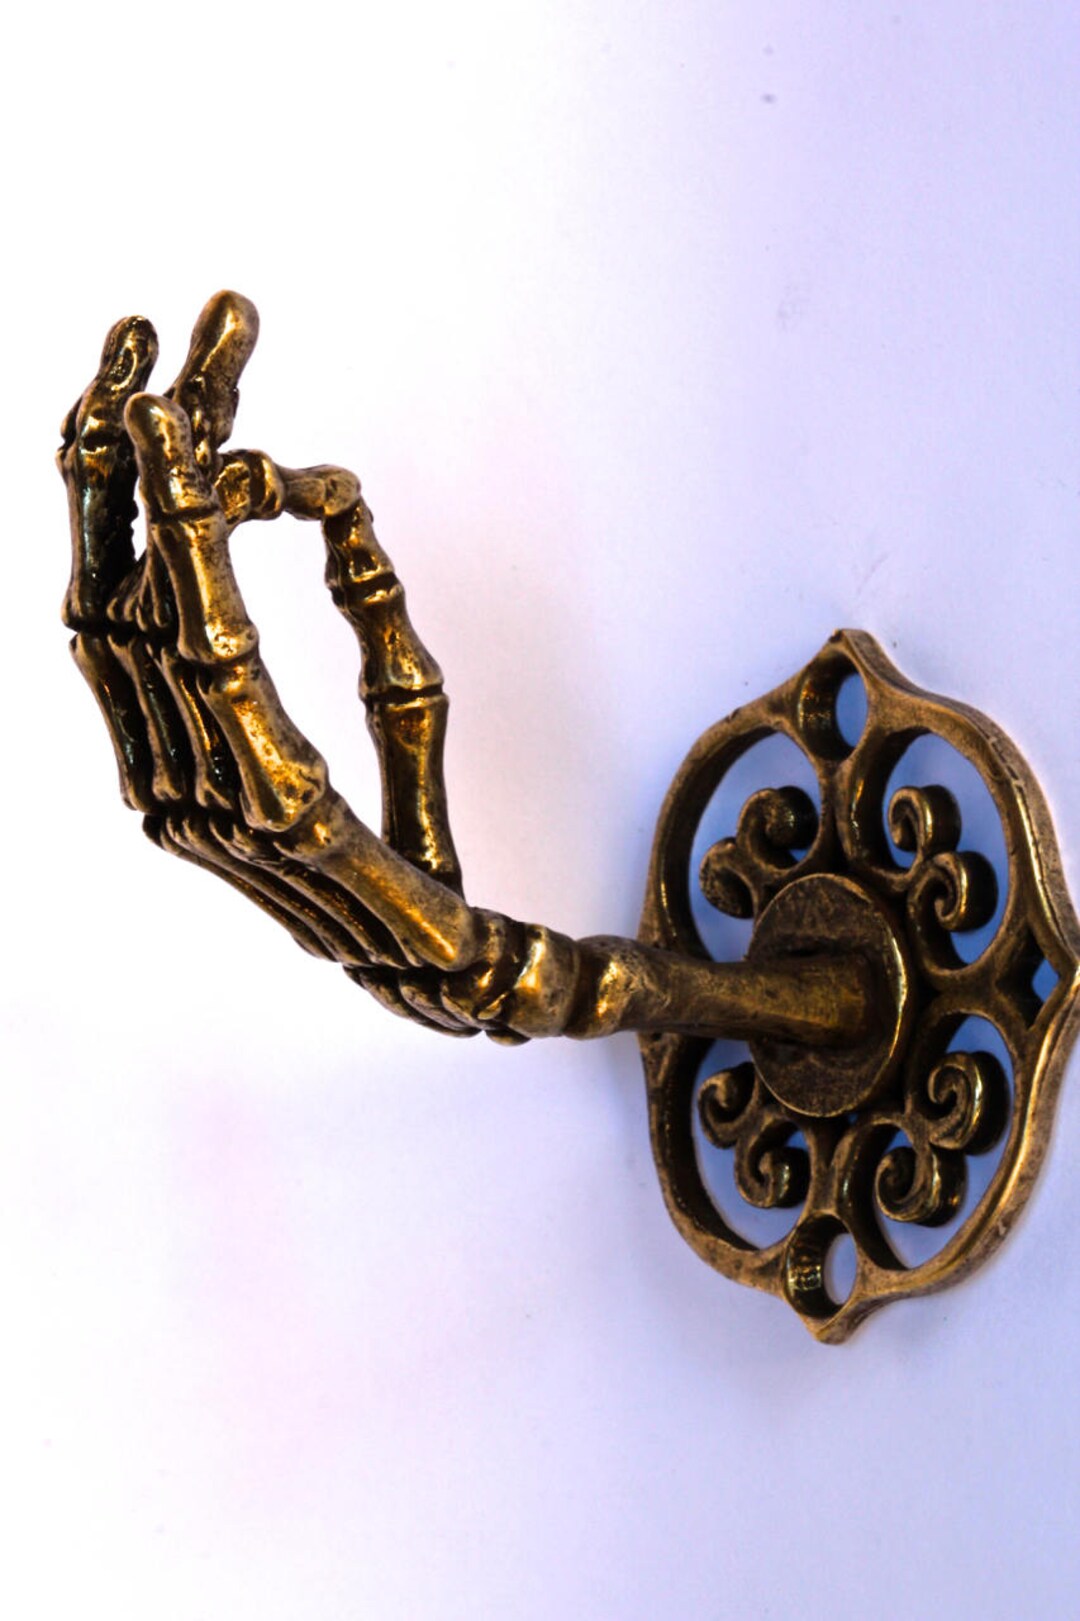 Bronze Plated Skeleton Hand Wall Hook Coat Rack Curtain Rod Holder Jewelry  Rack Made in NYC 